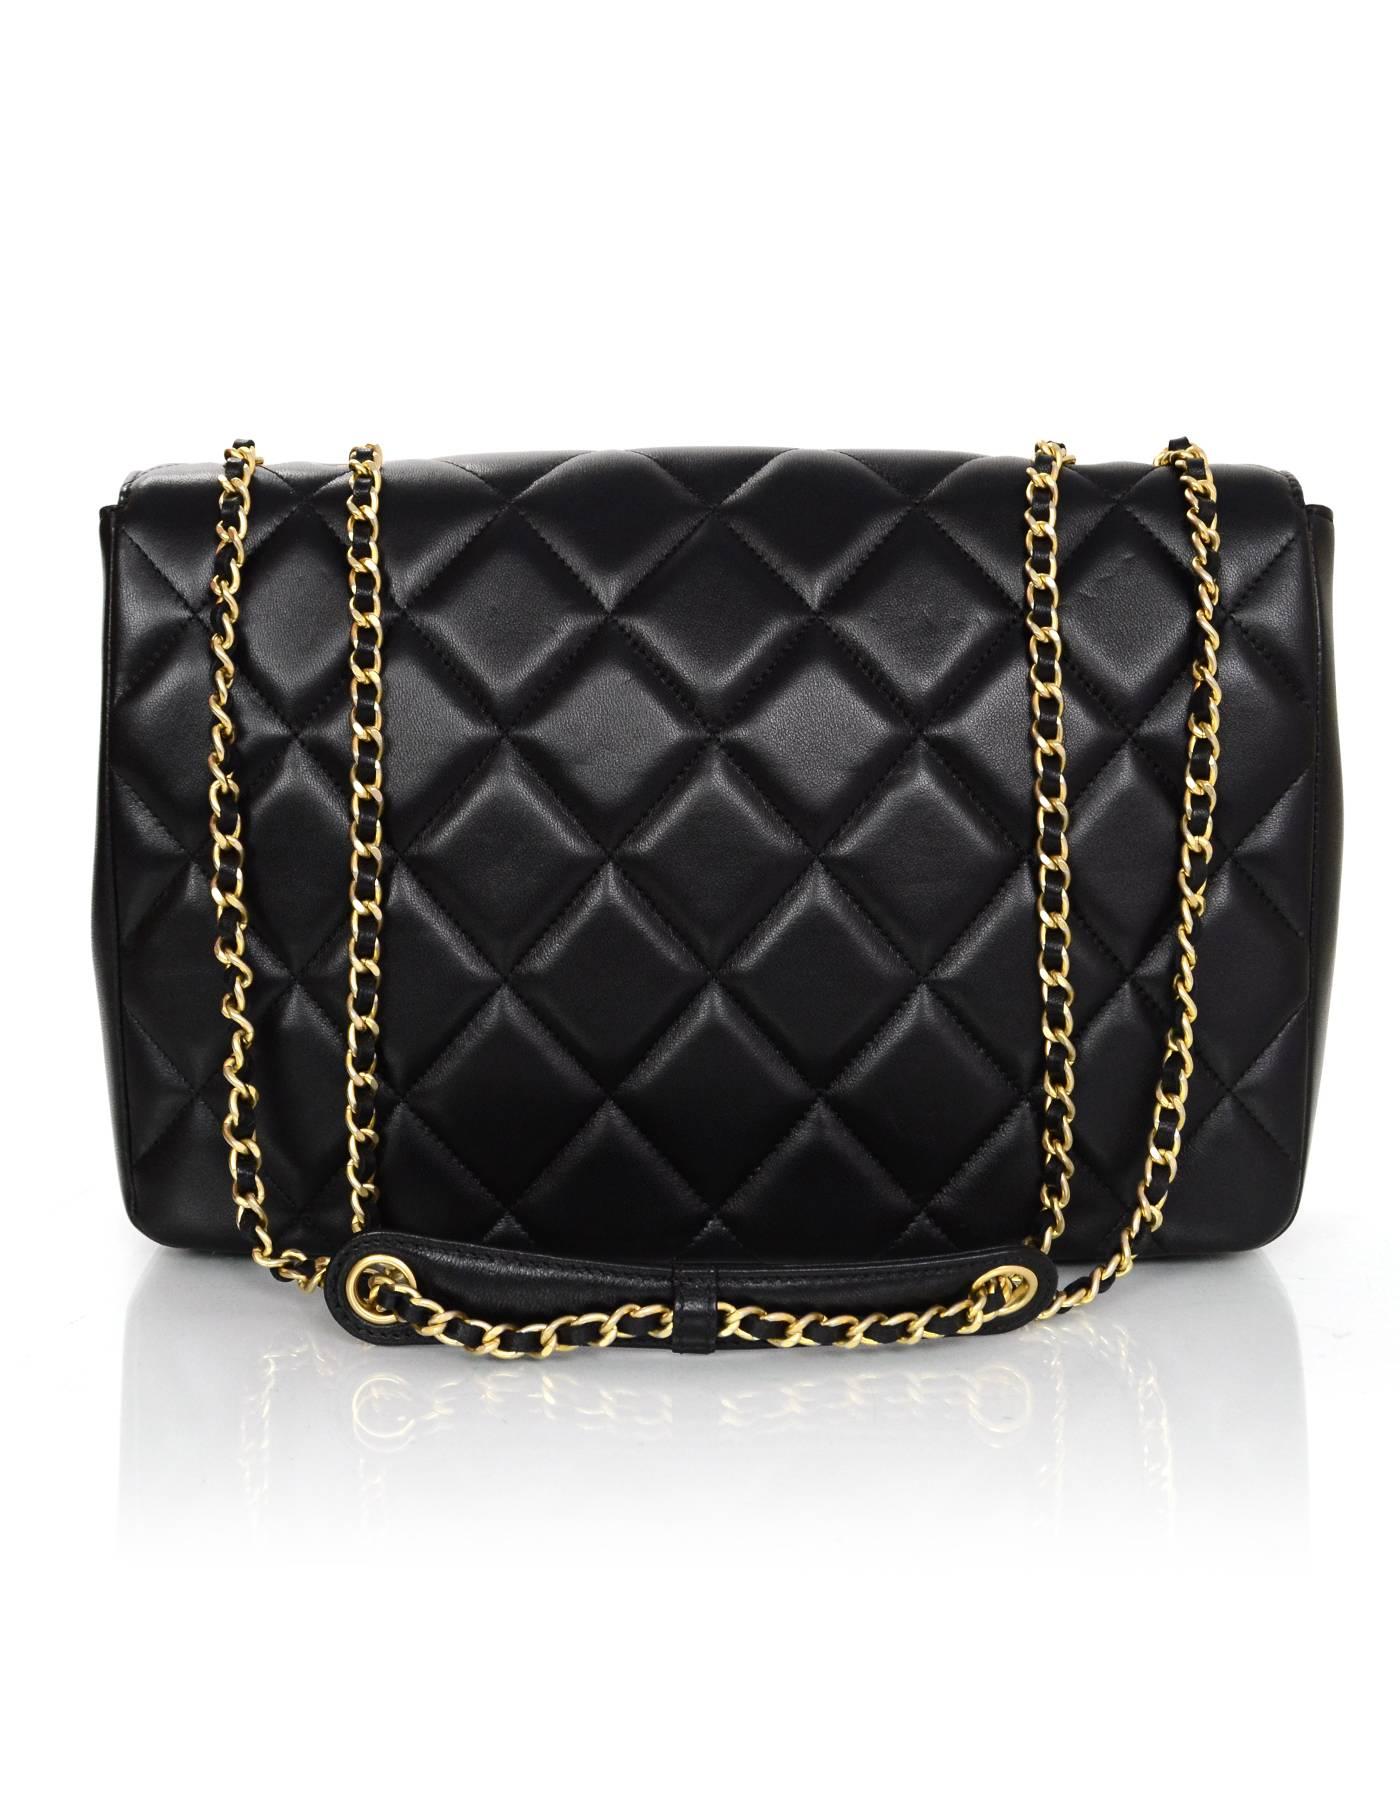 Chanel Quilted Lambskin Diamond CC Medium Flap Bag 
Features adjustable shoulder strap

Made In: Italy
Year of Production: 2014
Color: Black
Hardware: Goldtone
Materials: Lambskin
Lining: Black and burgundy leather
Closure/Opening: Flap top with